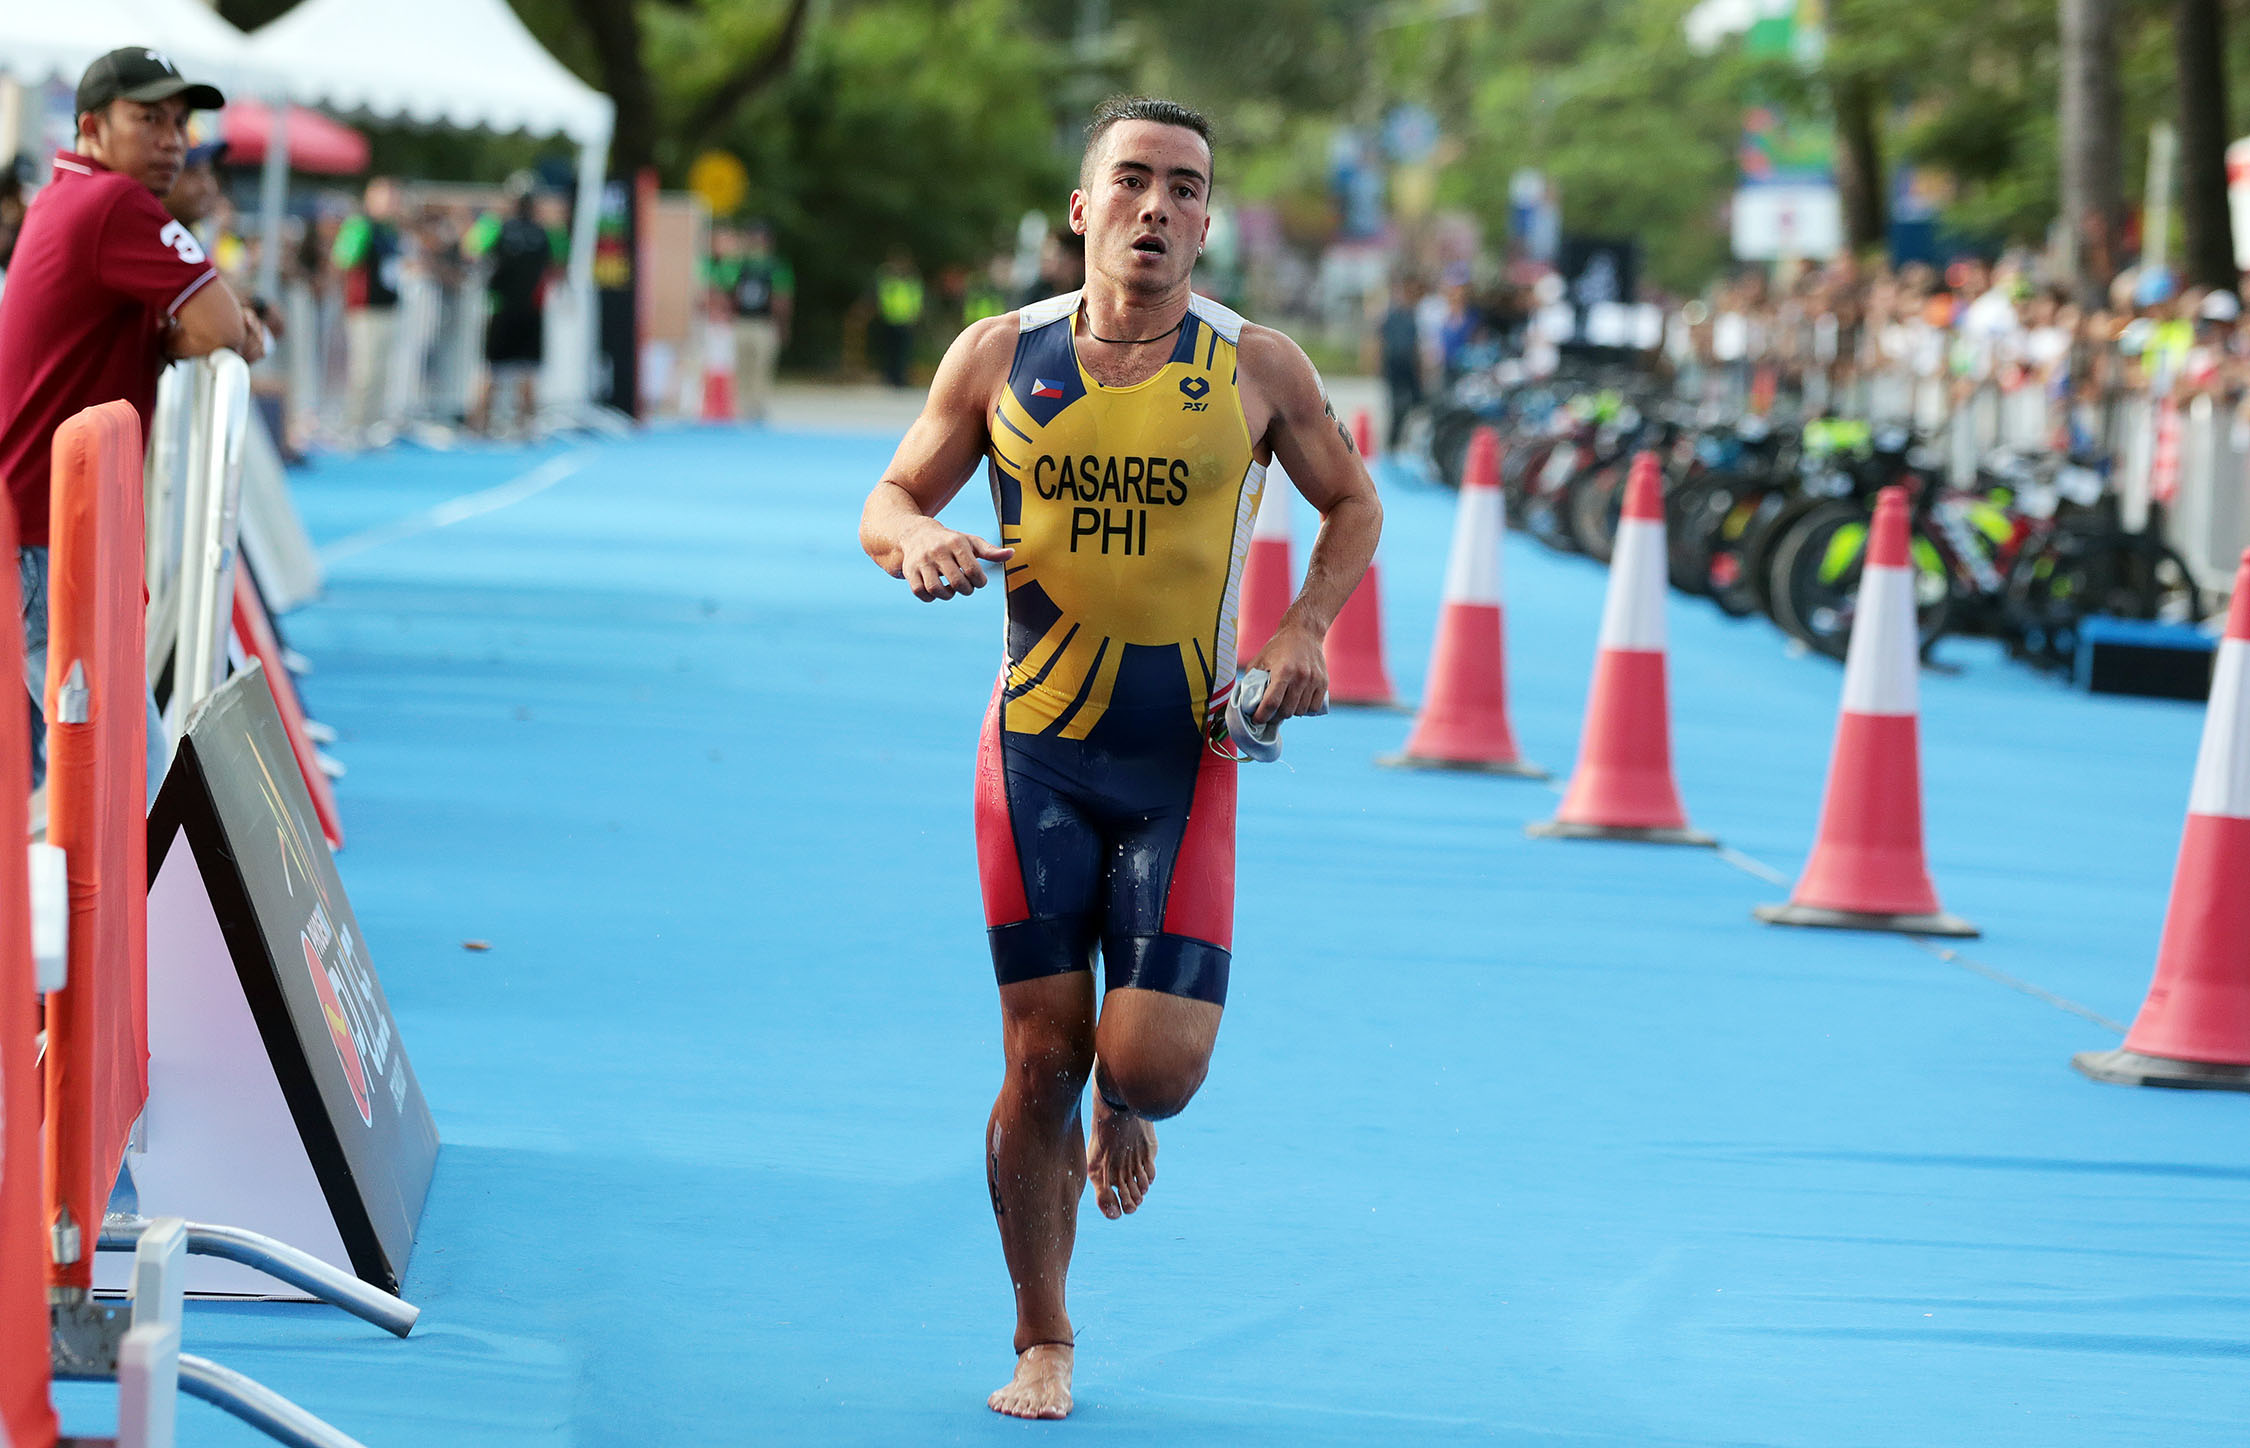 CACERES READY FOR THE IRONMAN DISTANCE